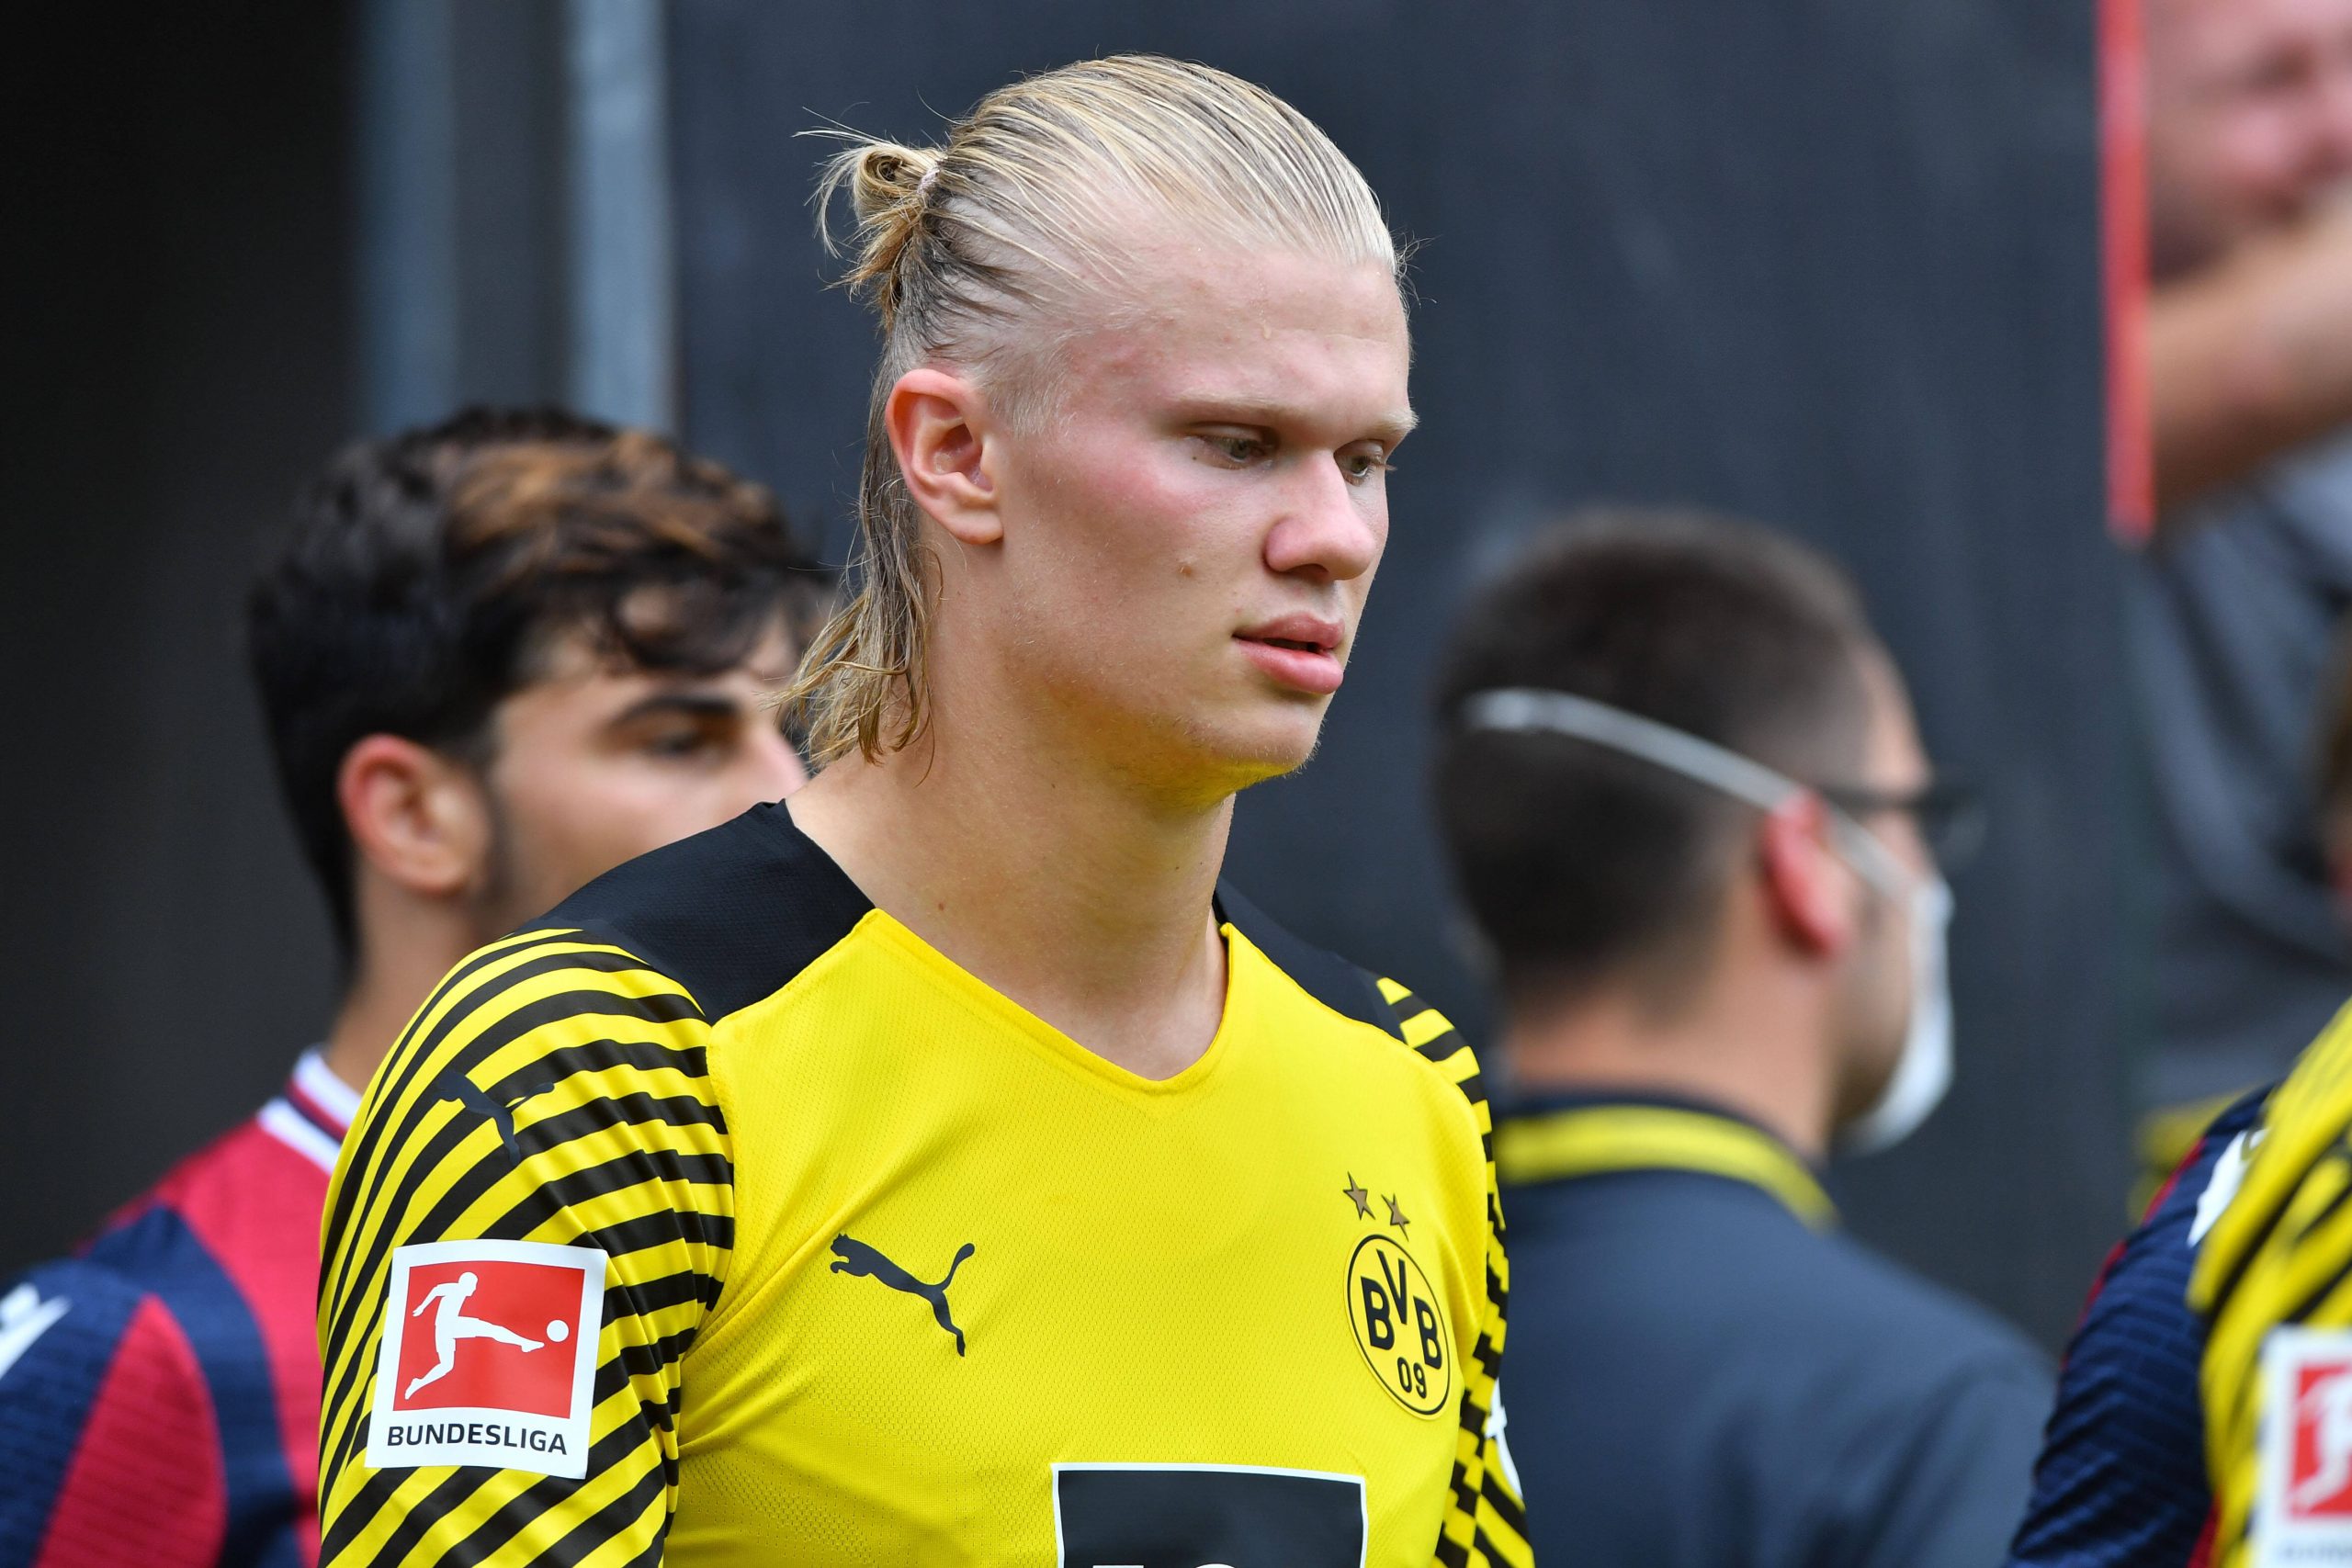 Erling Haaland opens up on Dortmund situation amid Chelsea interest.